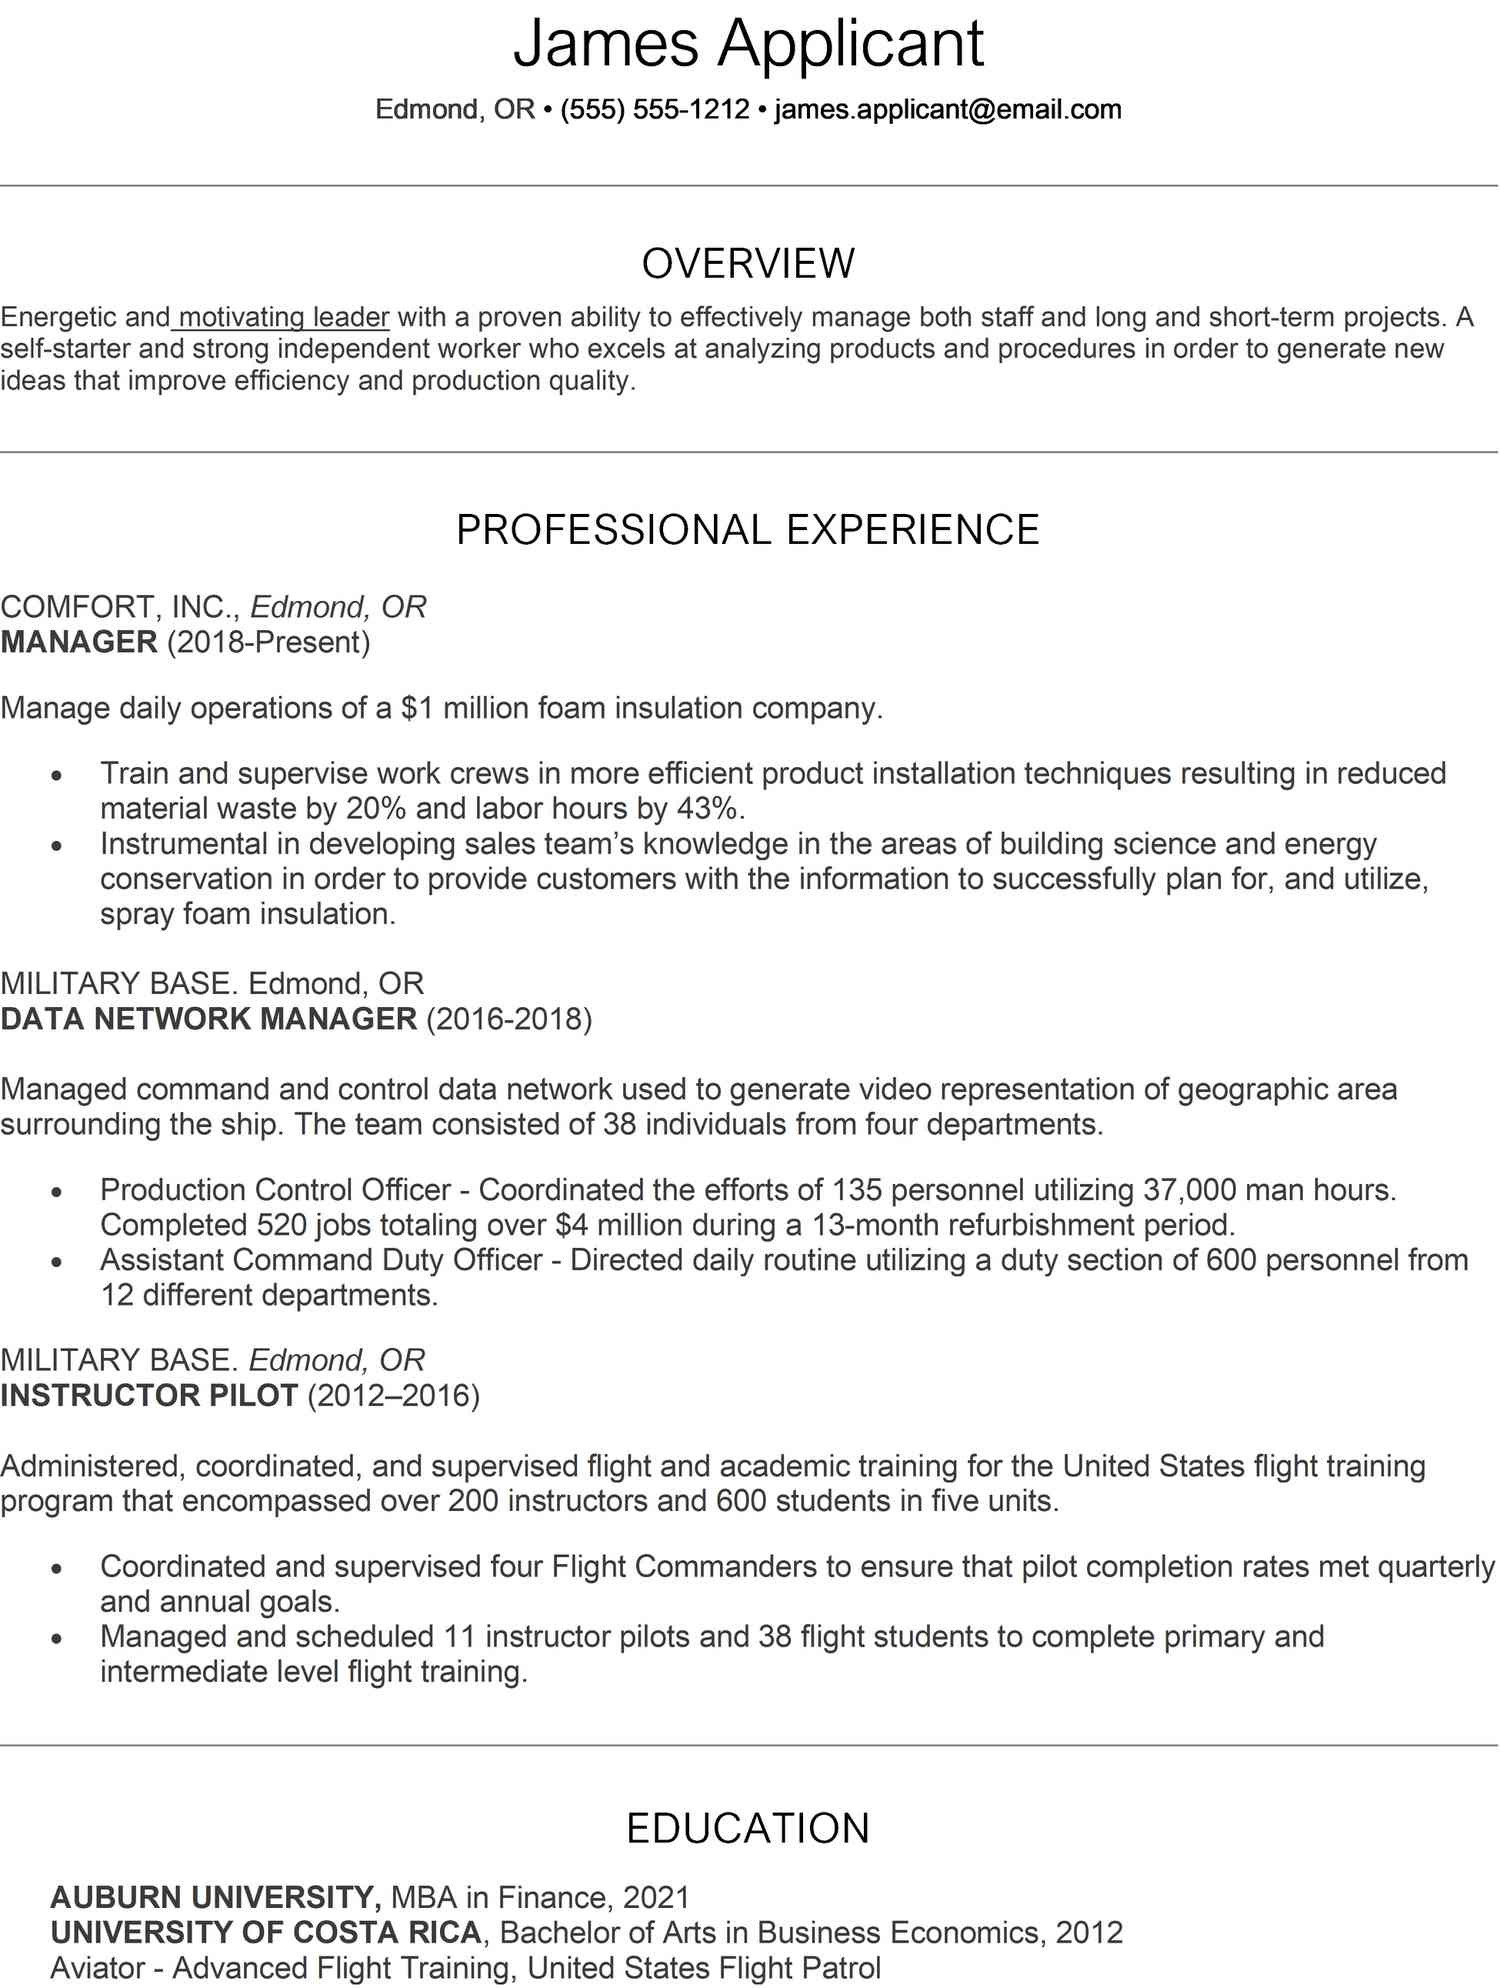 Chronological Resume with Employment Gap Samples Chronological Resume Example (with Writing Tips)